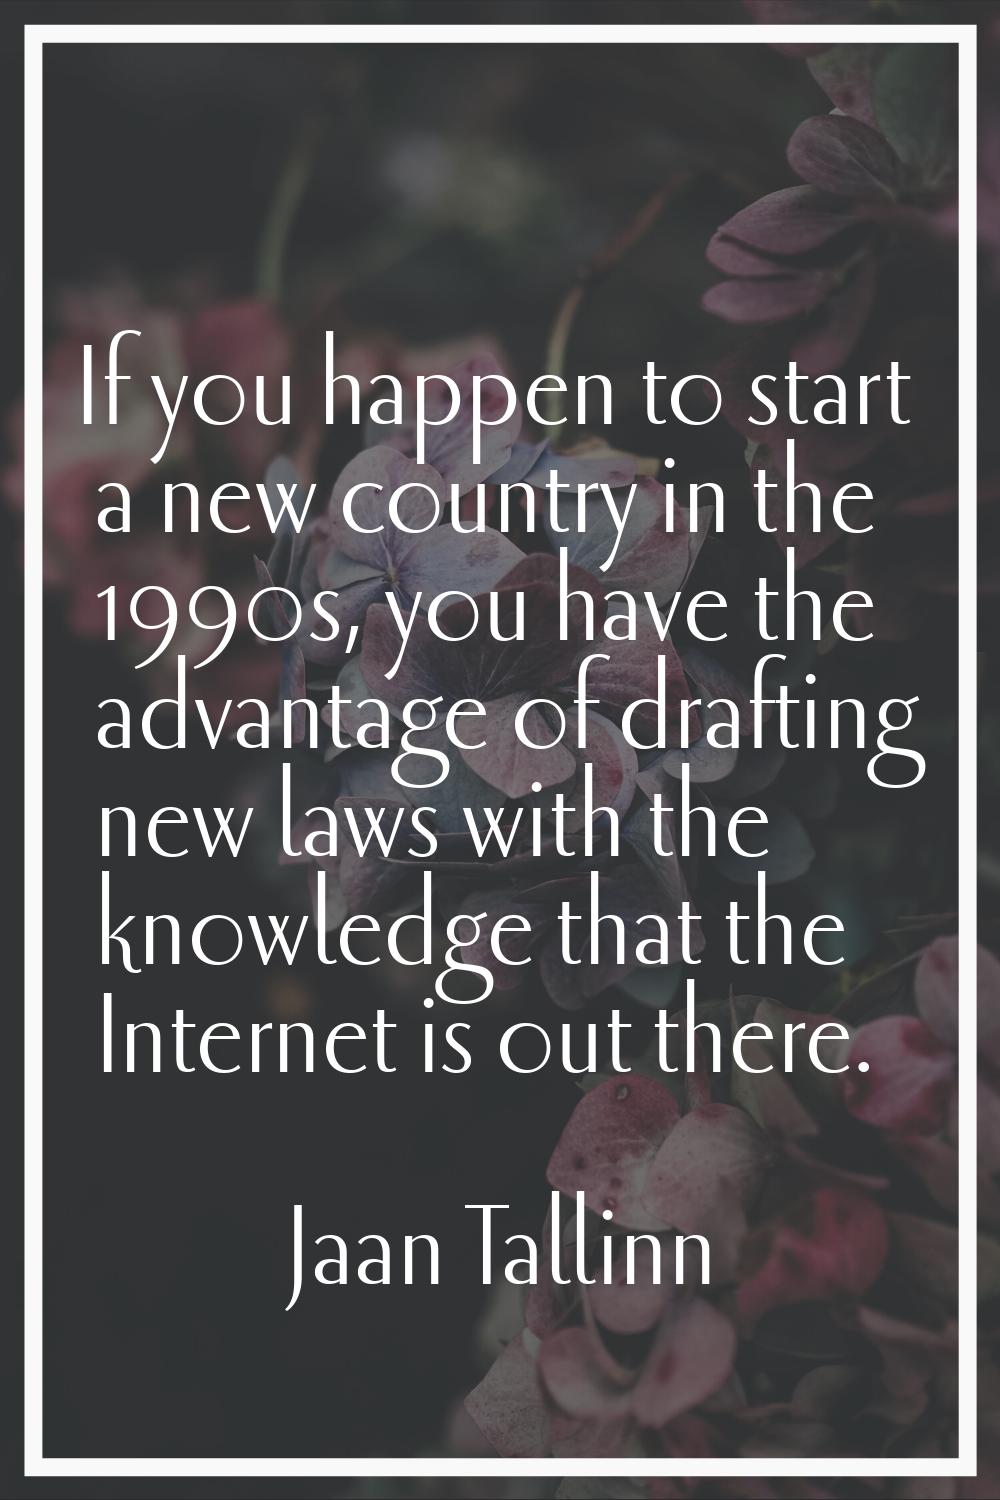 If you happen to start a new country in the 1990s, you have the advantage of drafting new laws with